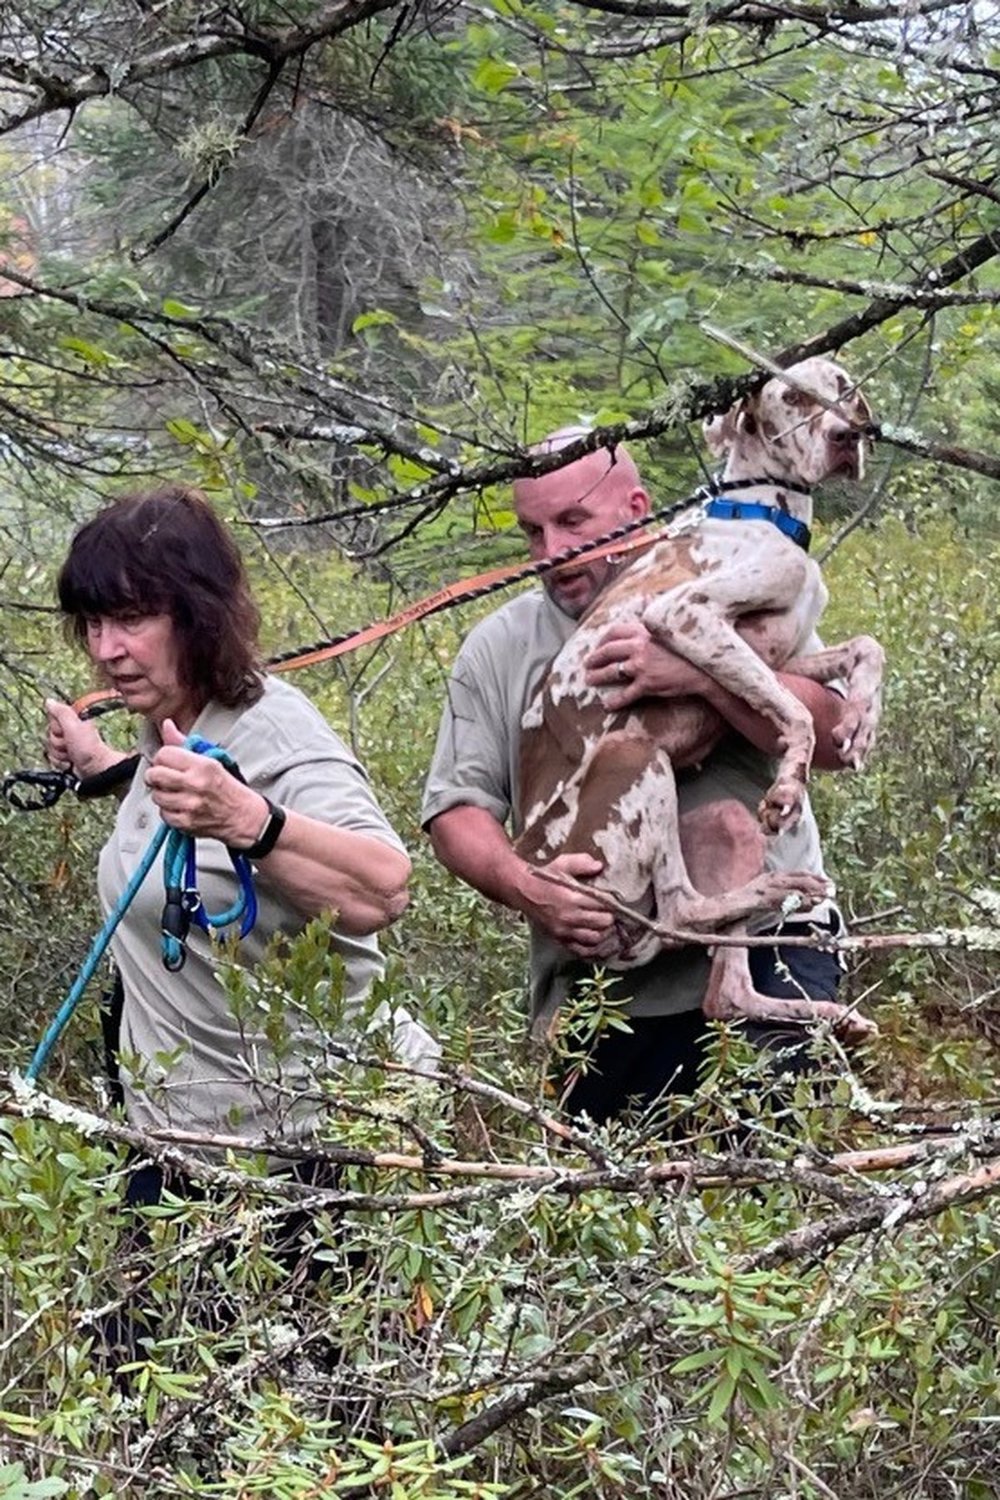 Bob Dodson carries the frightened 70-pound dog across a tippy pallet bridge.